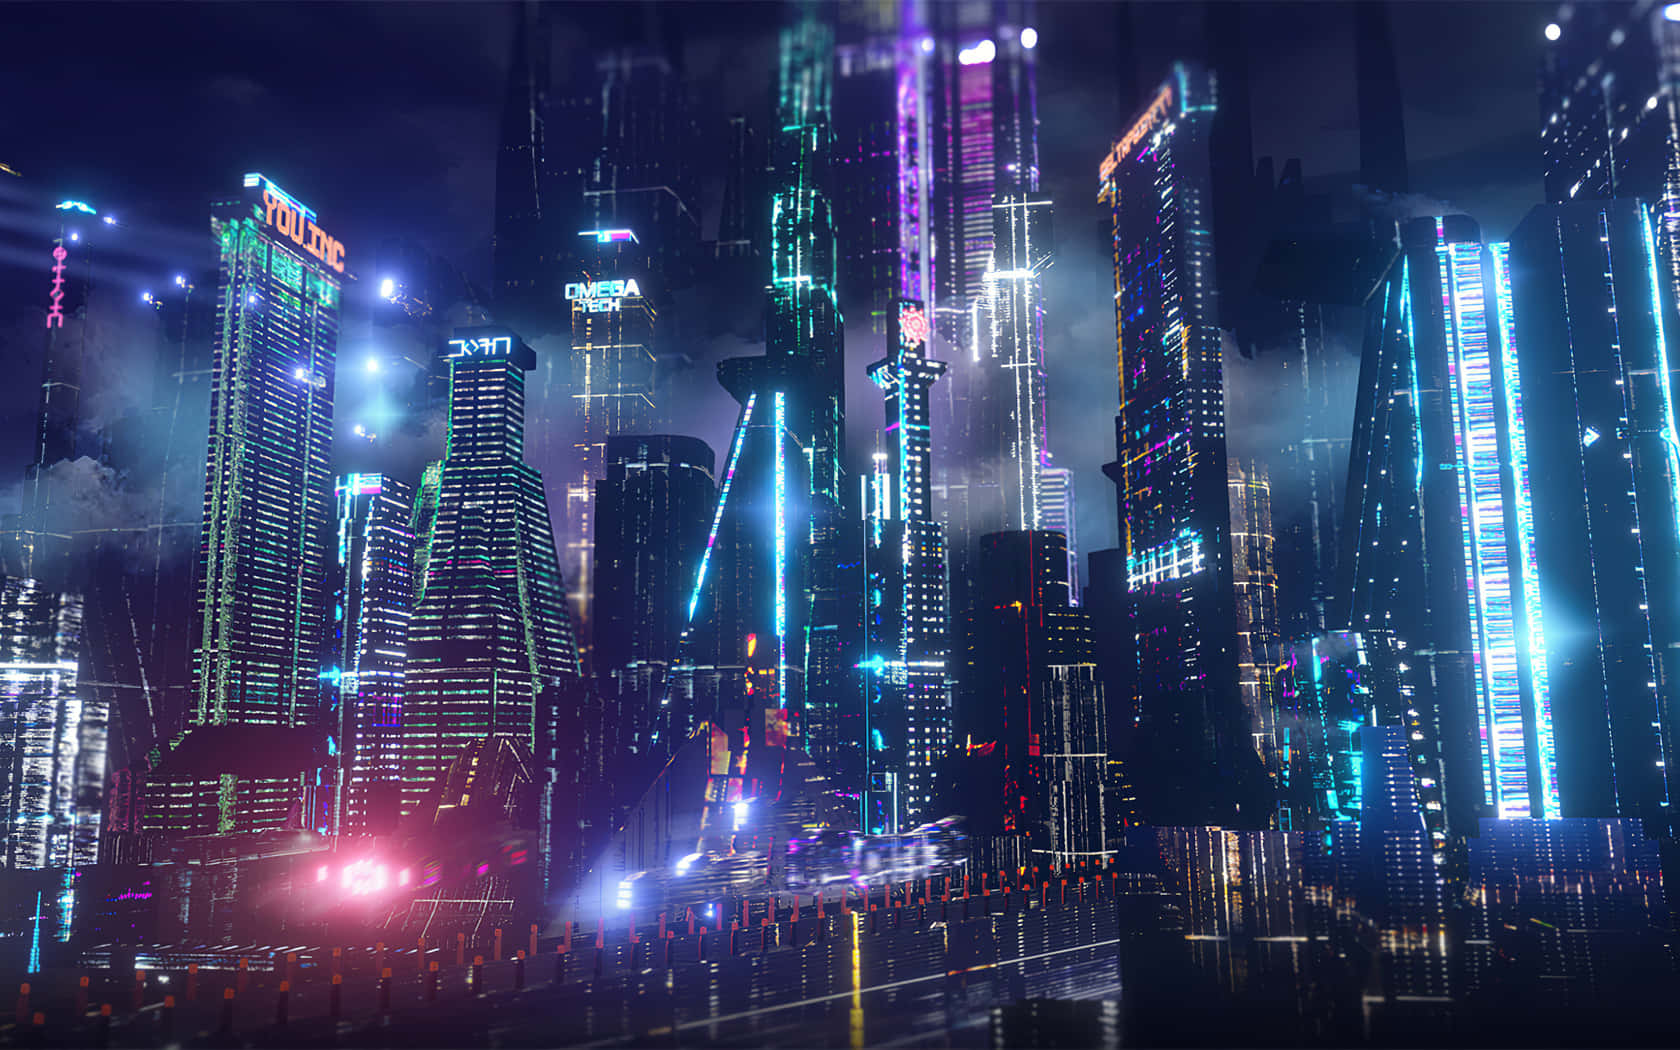 "The cityscape of Neon City never stops - explore, create, and be inspired!" Wallpaper